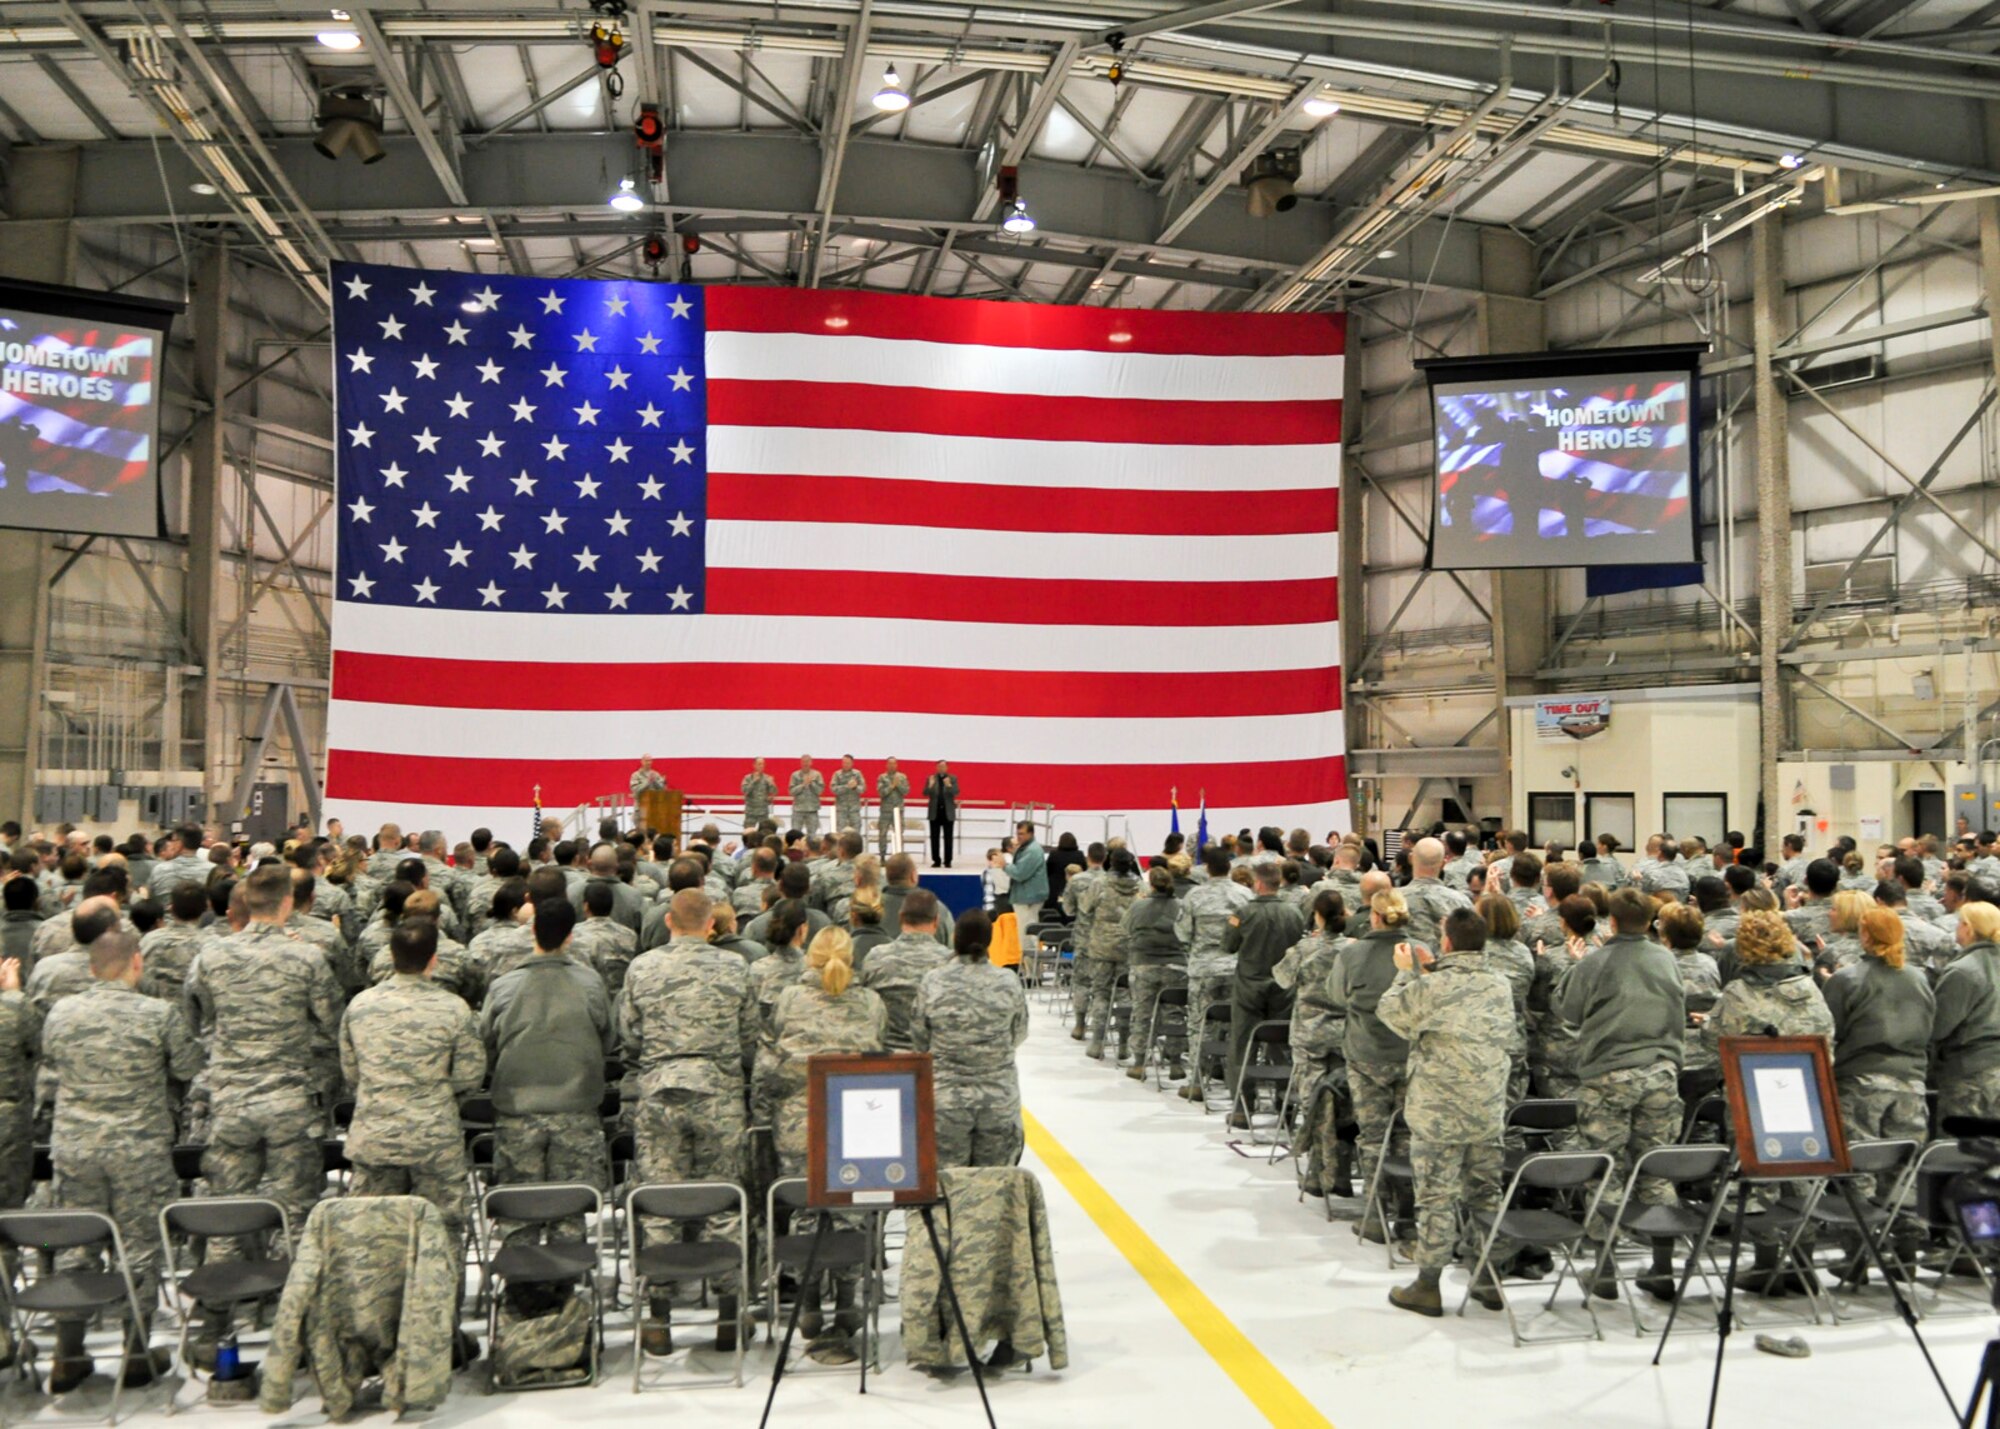 Senior military and civilian officials lead applause at the conclusion of a Hometown Heroes Salute Campaign award ceremony at the 128th Air Refueling Wing, Milwaukee, on Sunday, December 4, 2011.  Over 500 Airmen and family members attended the award ceremony wherein over 100 Airmen were formally recognized for their contributions while deployed overseas.  The Hometown Heroes Salute Campaign is an Air National Guard event that recognizes Airmen who have deployed overseas for more than 30 days.  Air National Guard photo by Tech. Sgt. Tom Sobczyk.